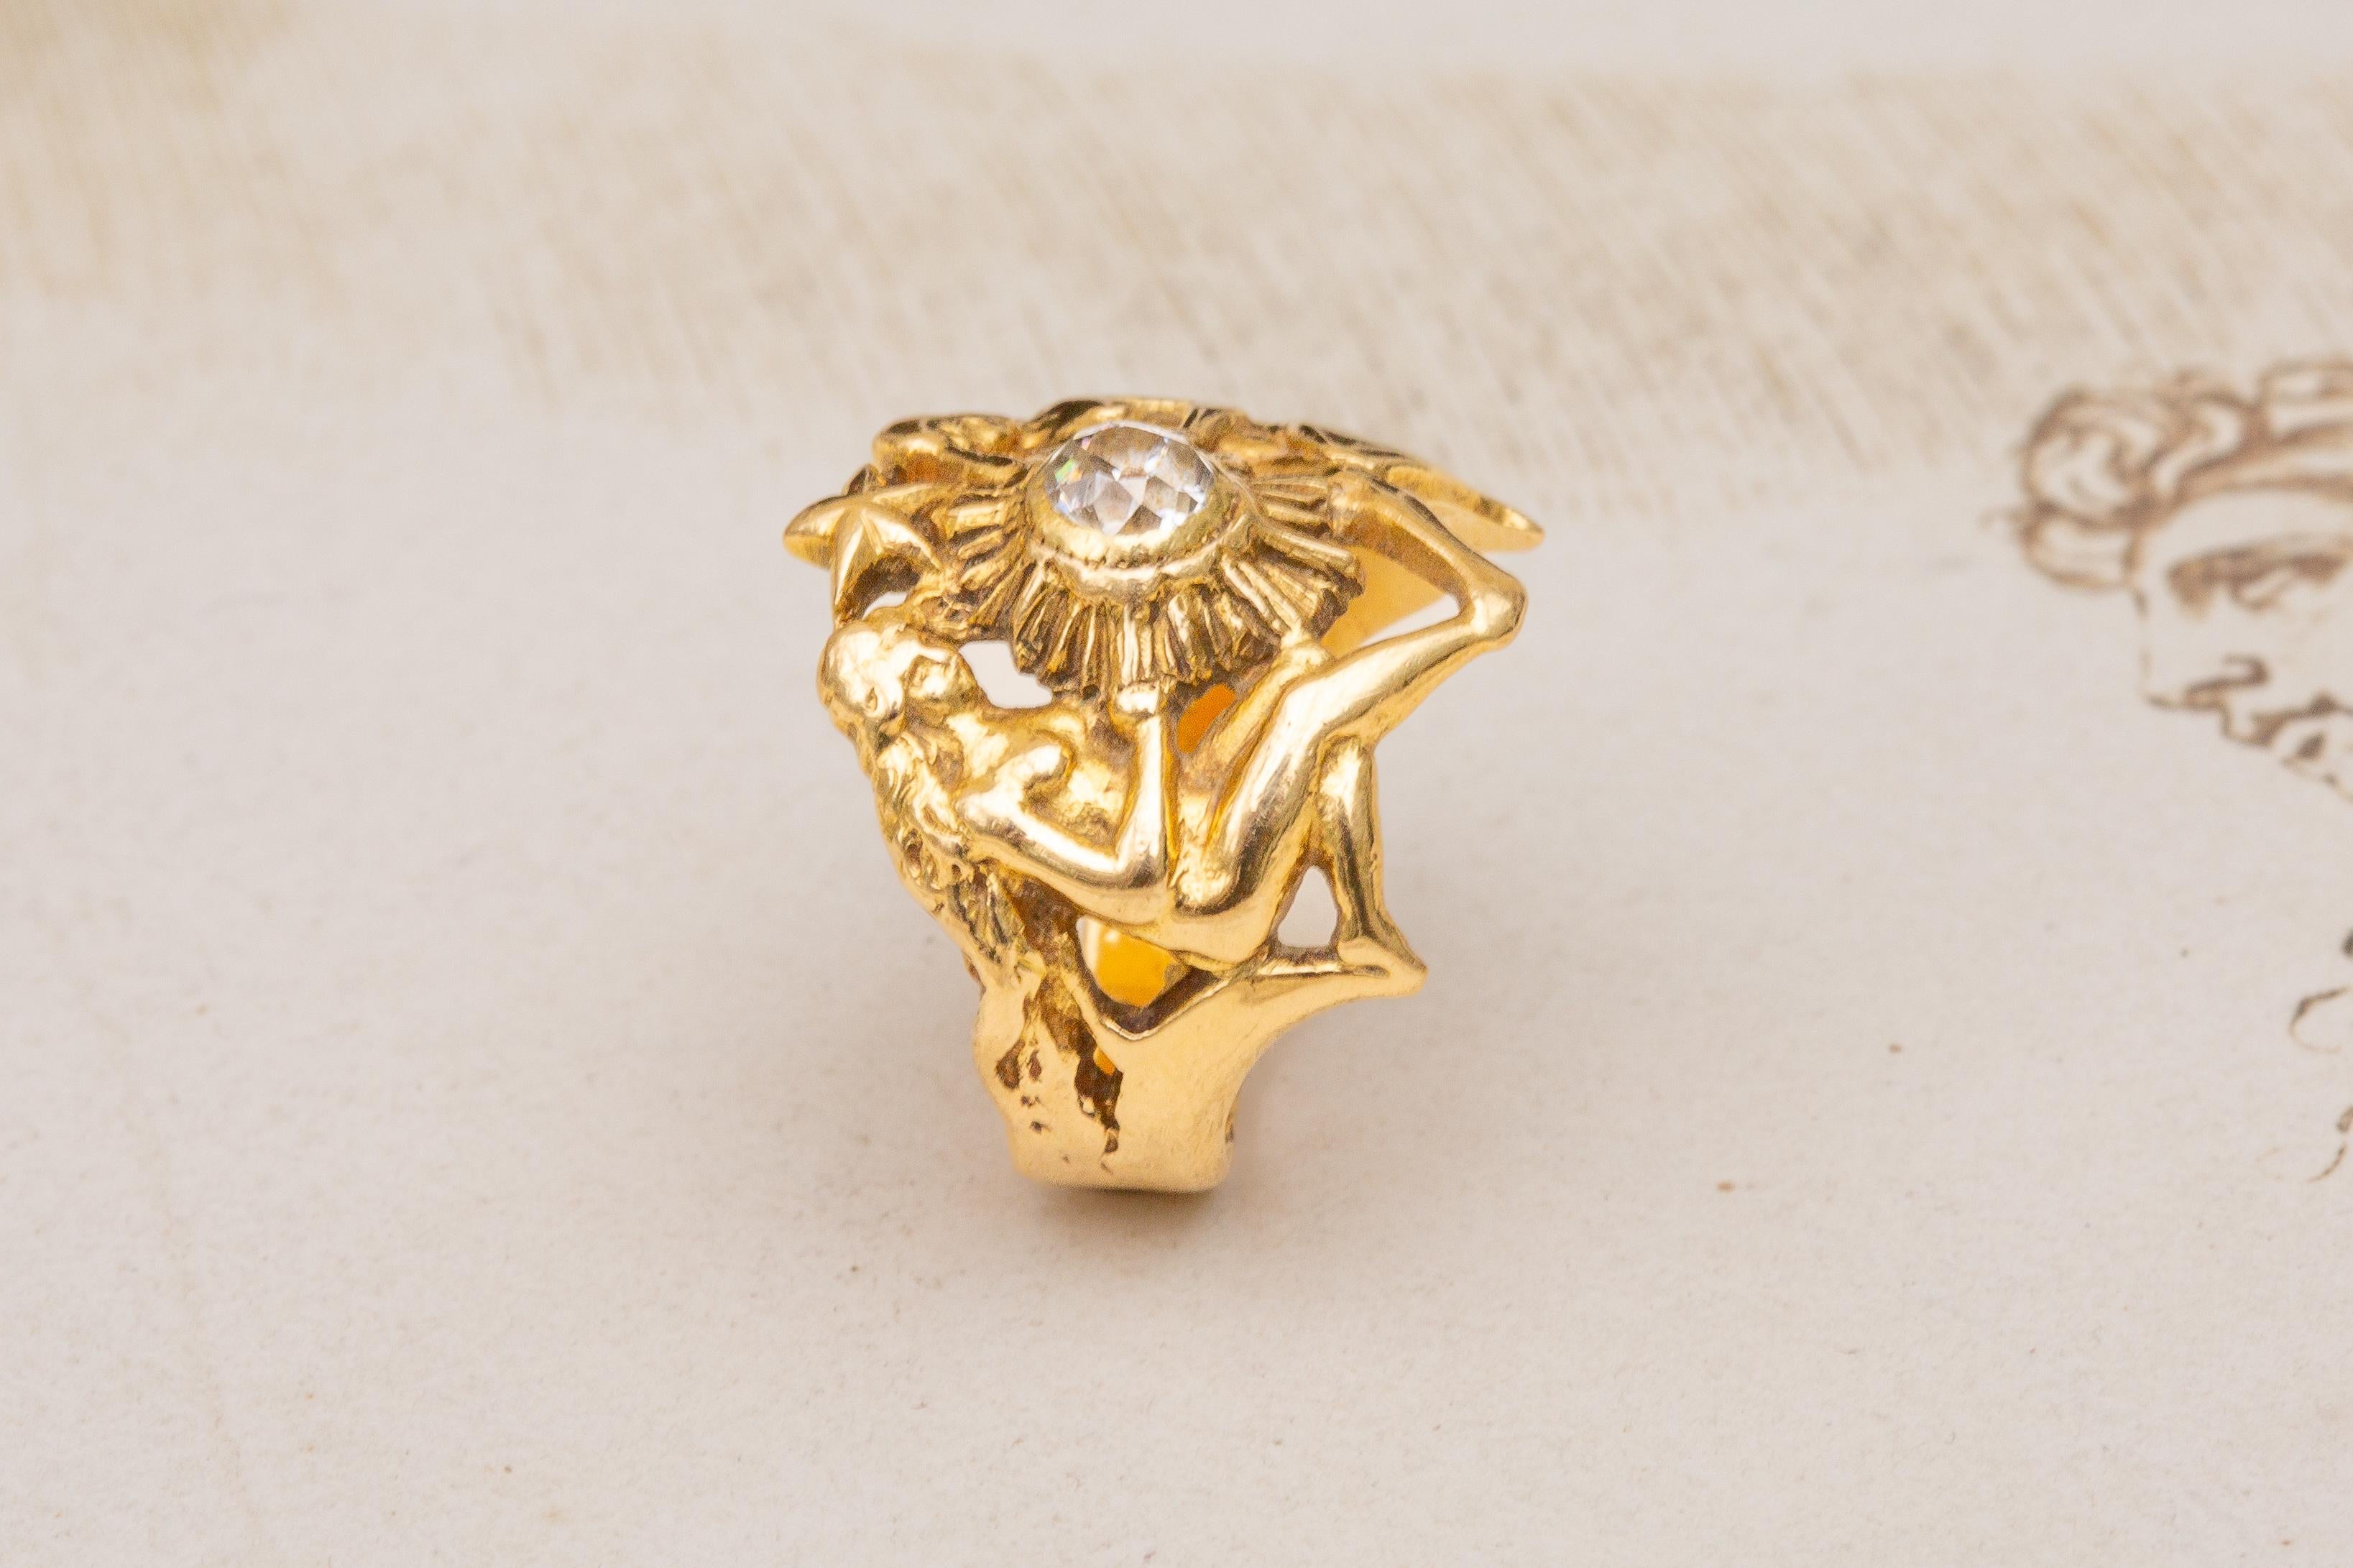 Art Nouveau French Antique Heavy 18K Gold Ethereal Figural 0.35ct Old European Cut Diamond